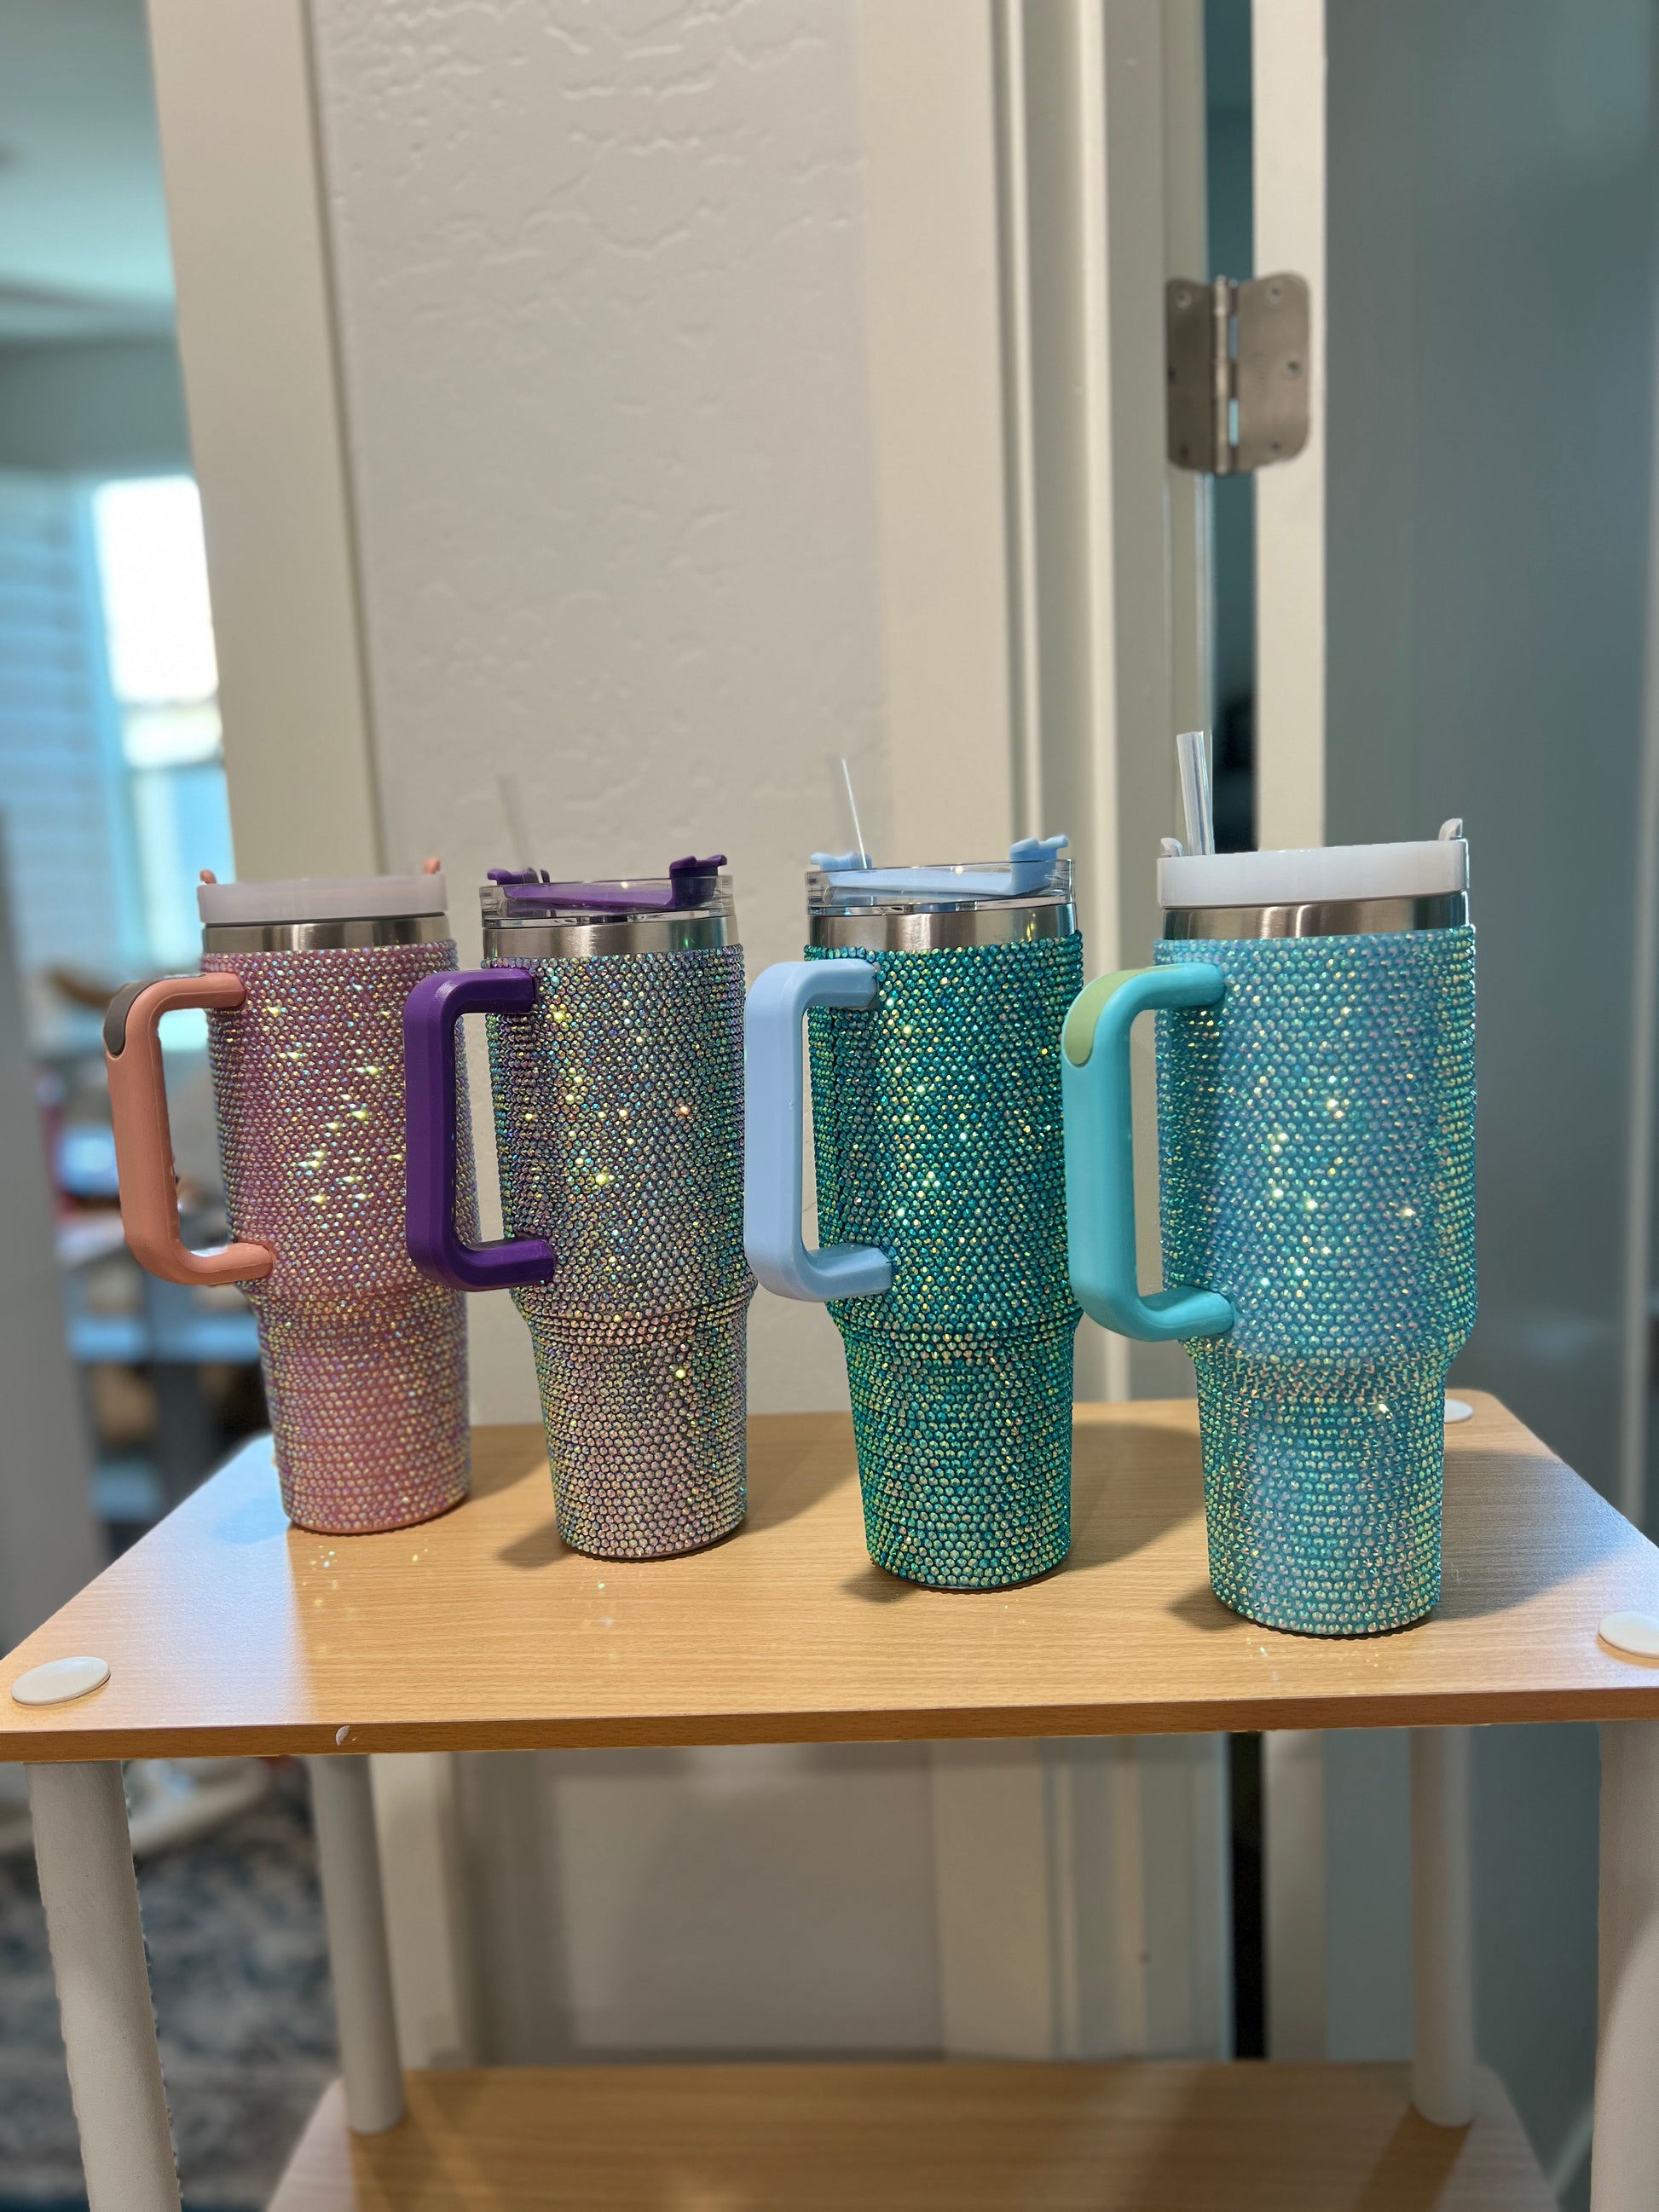 FASHIONABLE 40oz STAINLESS STEEL TUMBLER – Jeannine's Gifts RVC